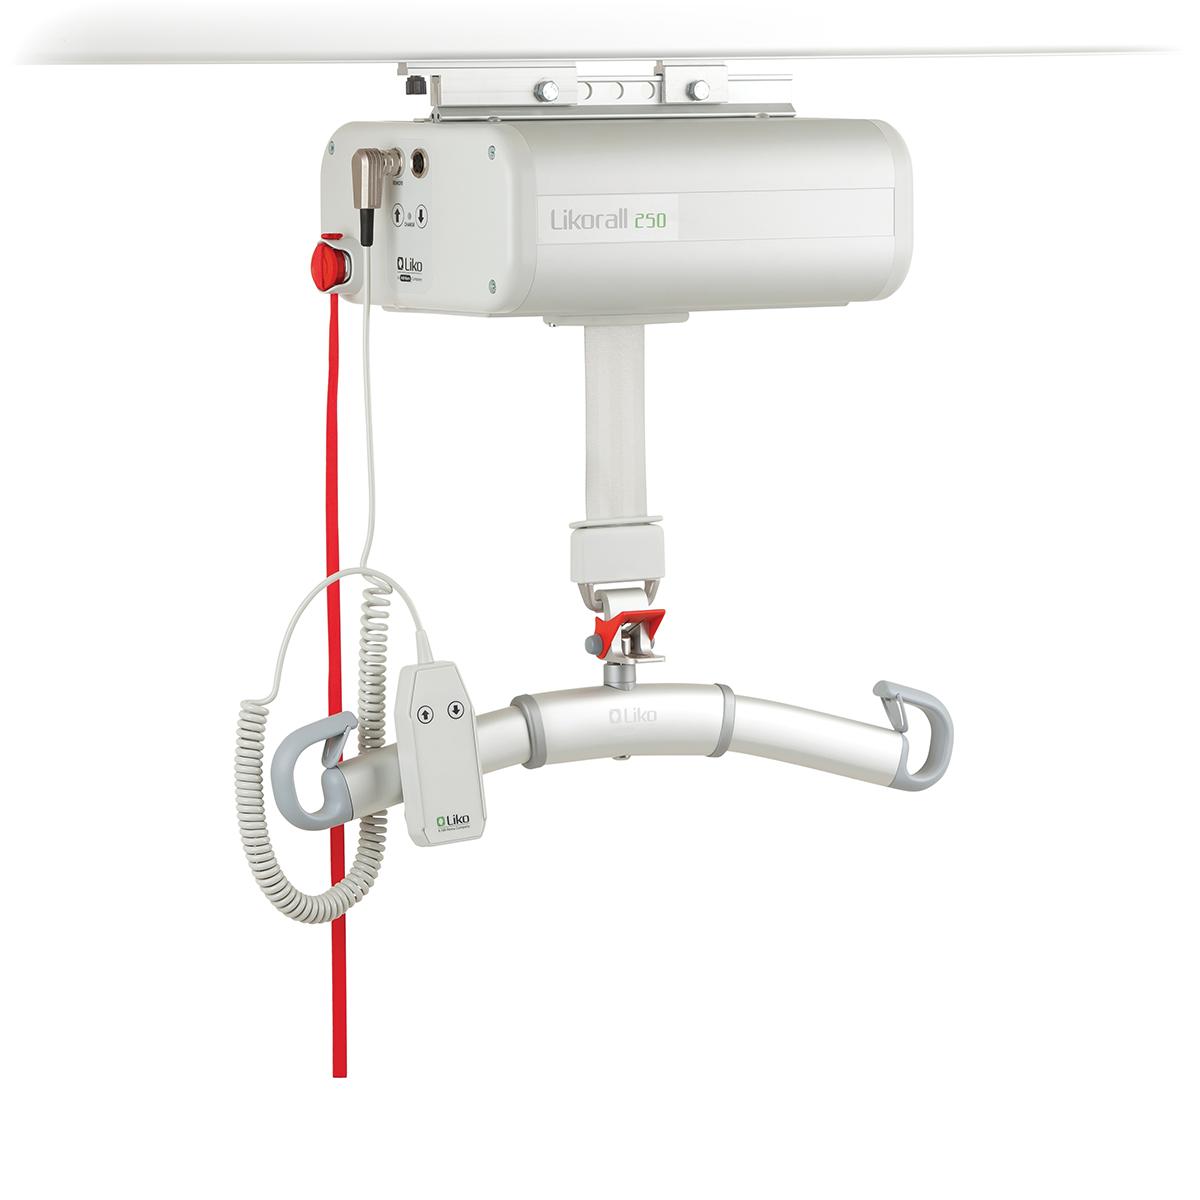 A posterior view of the Hillrom LikoGuard XL overhead patient lift. The unit's handheld control plugs into a port at left.